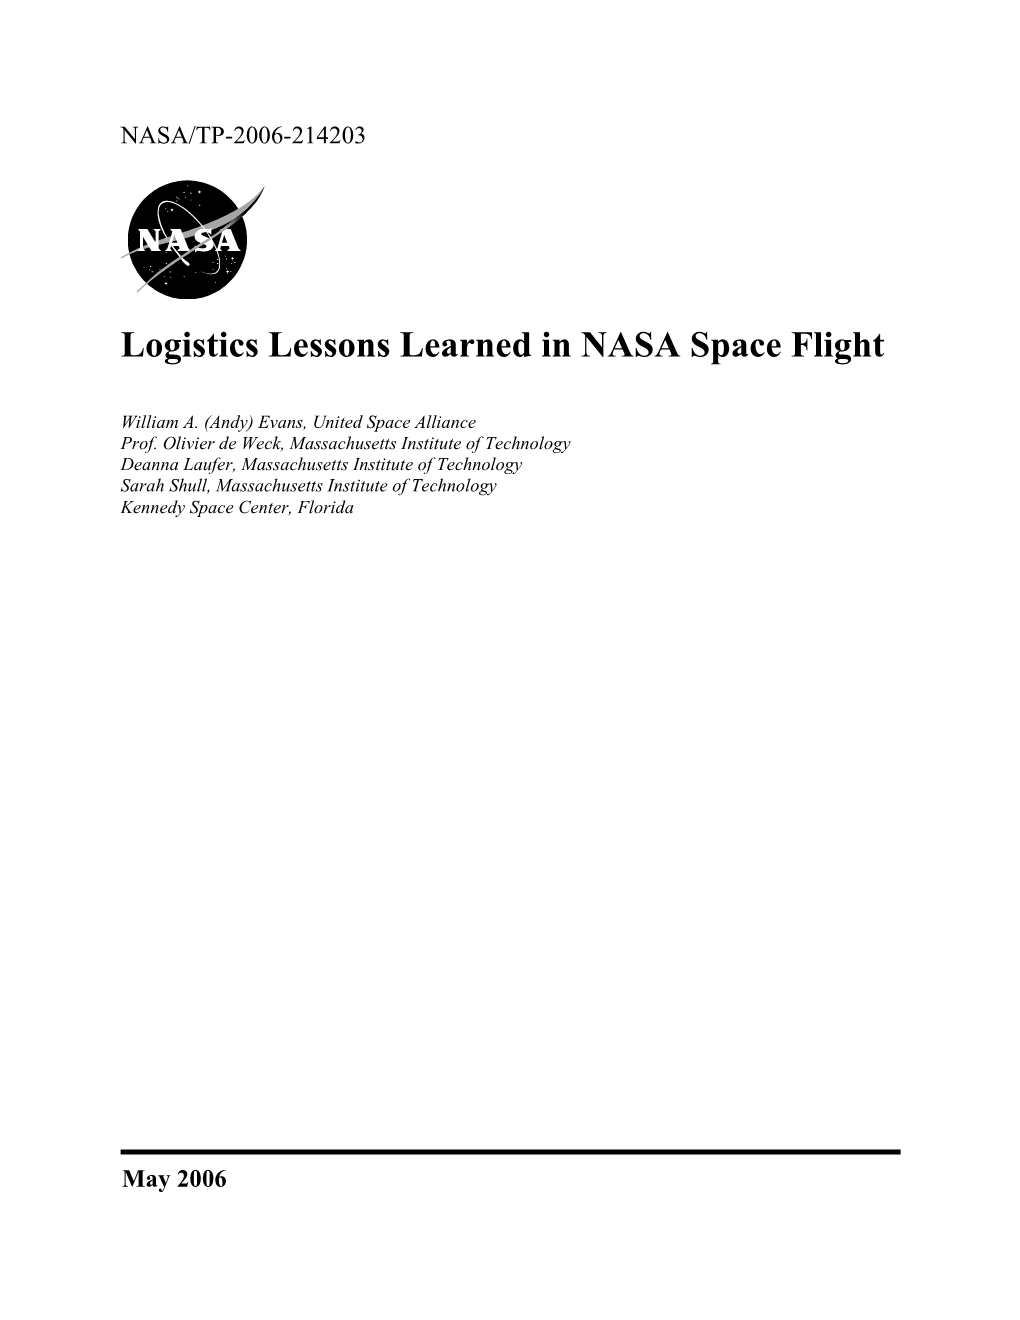 Logistics Lessons Learned in NASA Space Flight